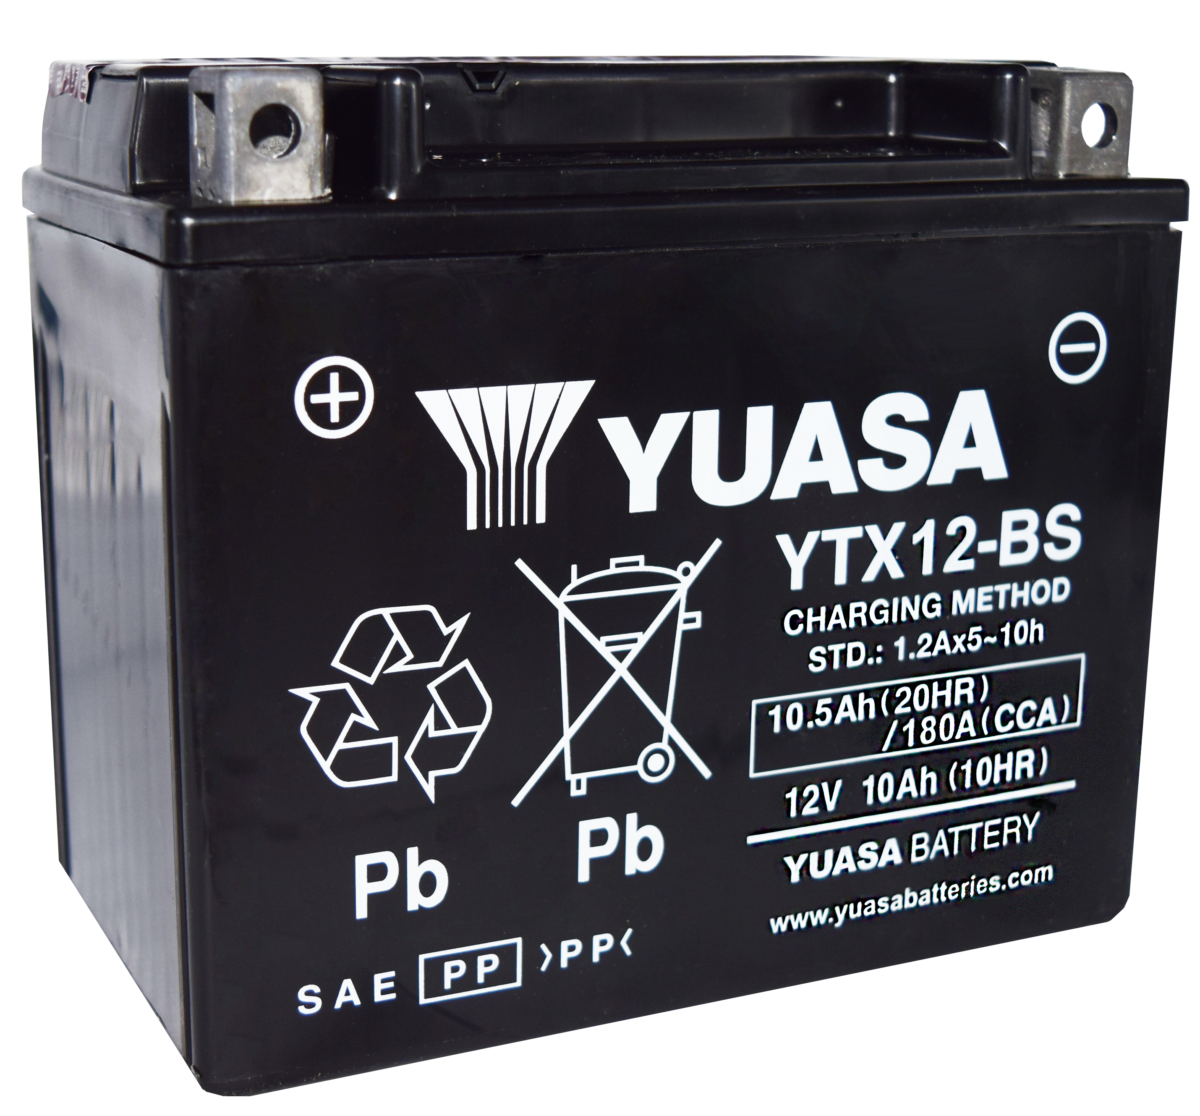 Yuasa YTX12-BS Battery for motorsports, powersports, and motorcycle